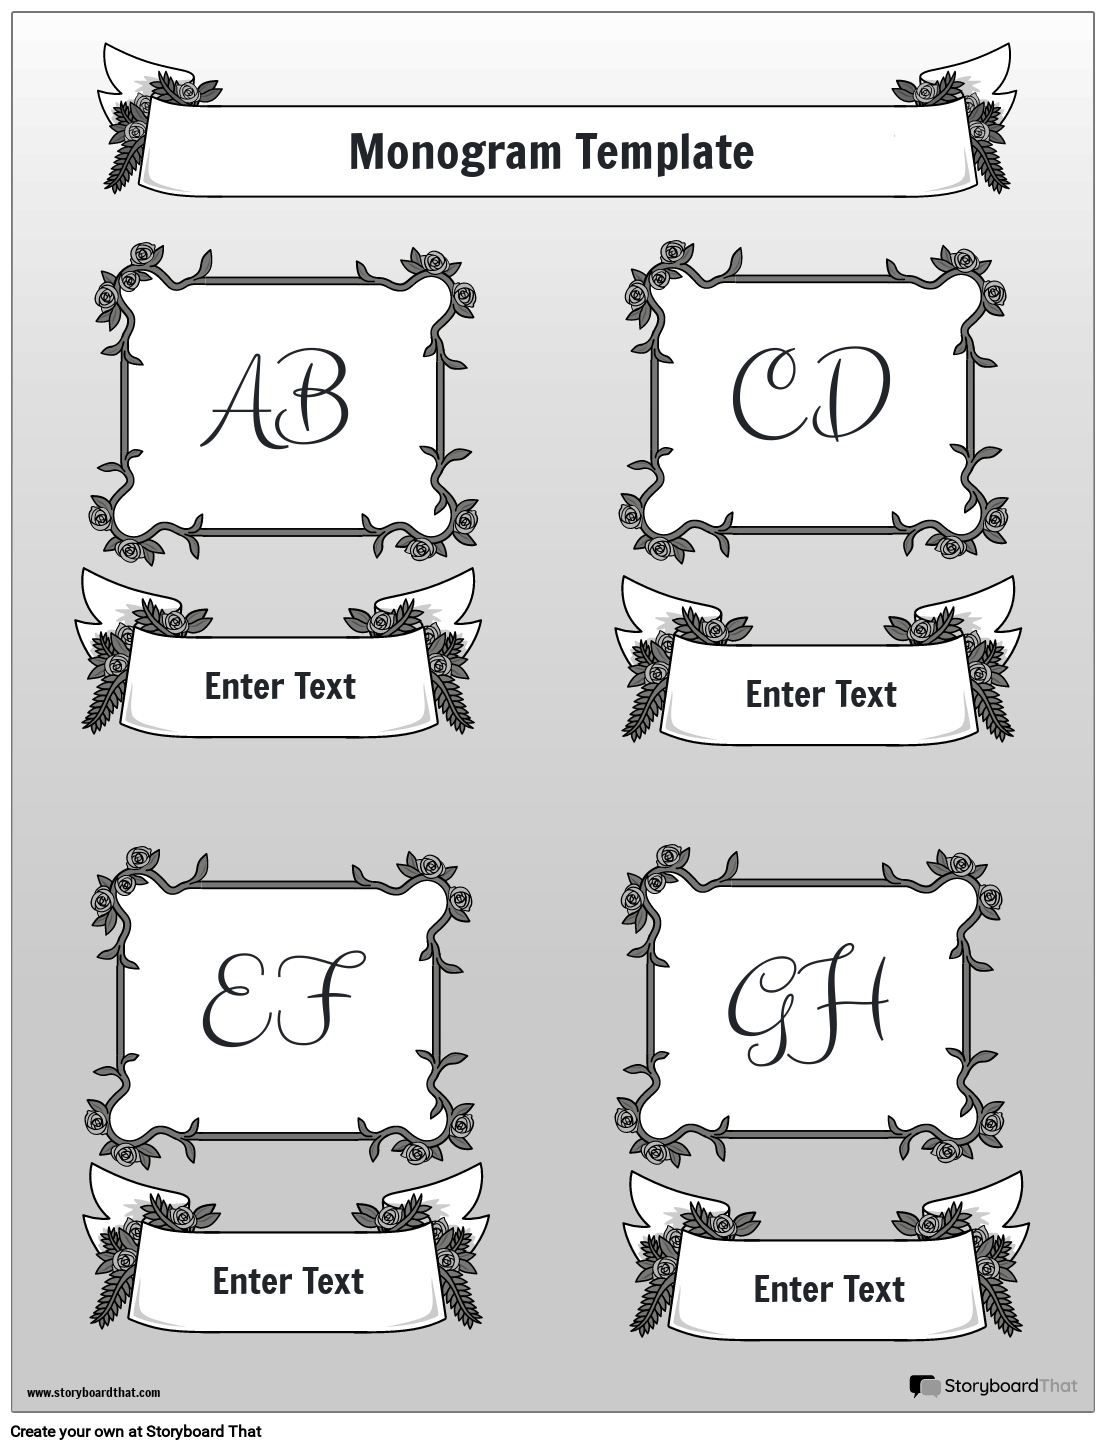 Monogram Template with Framed Boxes